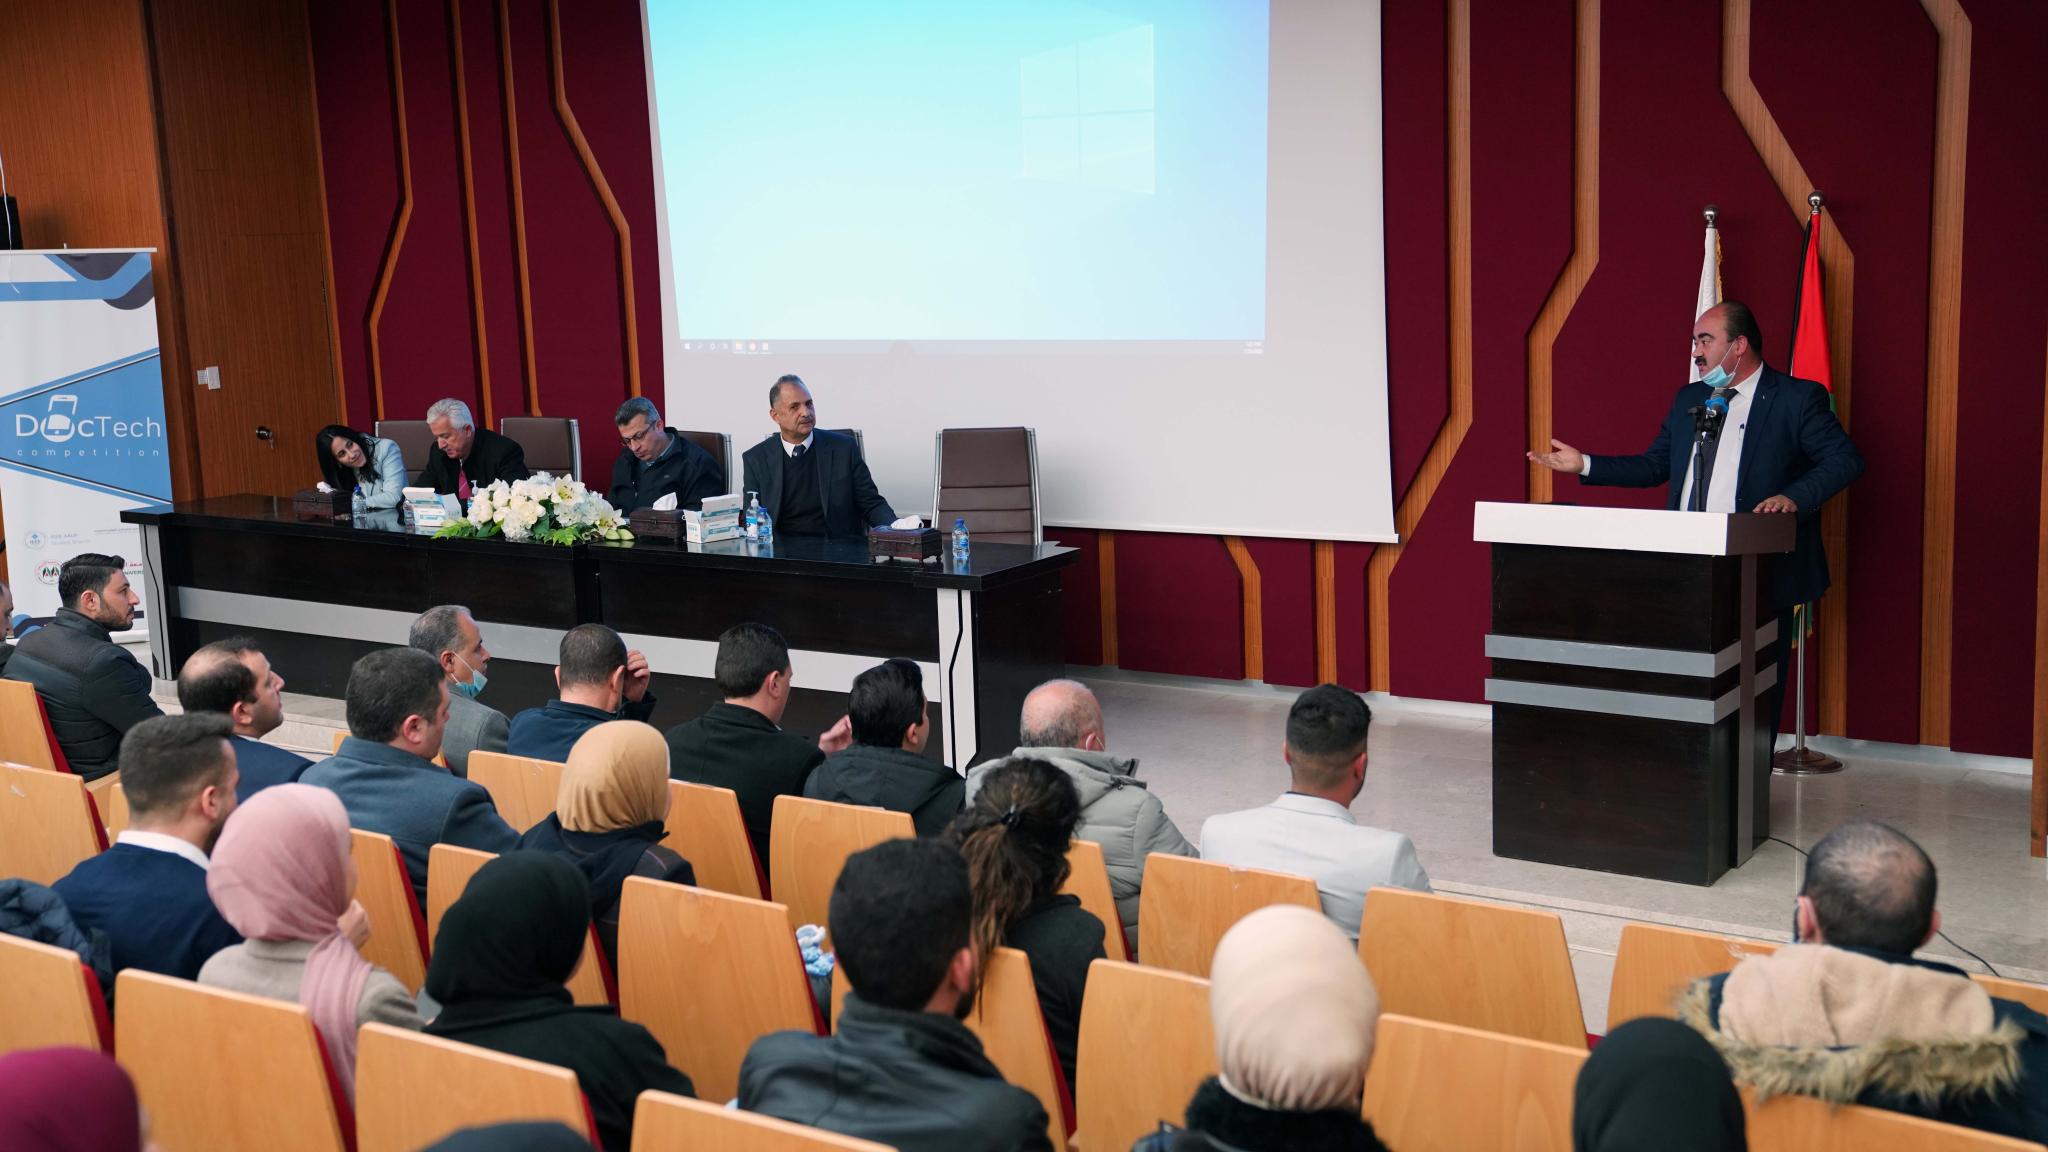 AAUP Organizes the Final Ceremony for the Competition of the Best Idea of a Technological Application in the Medical Field "DocTech"